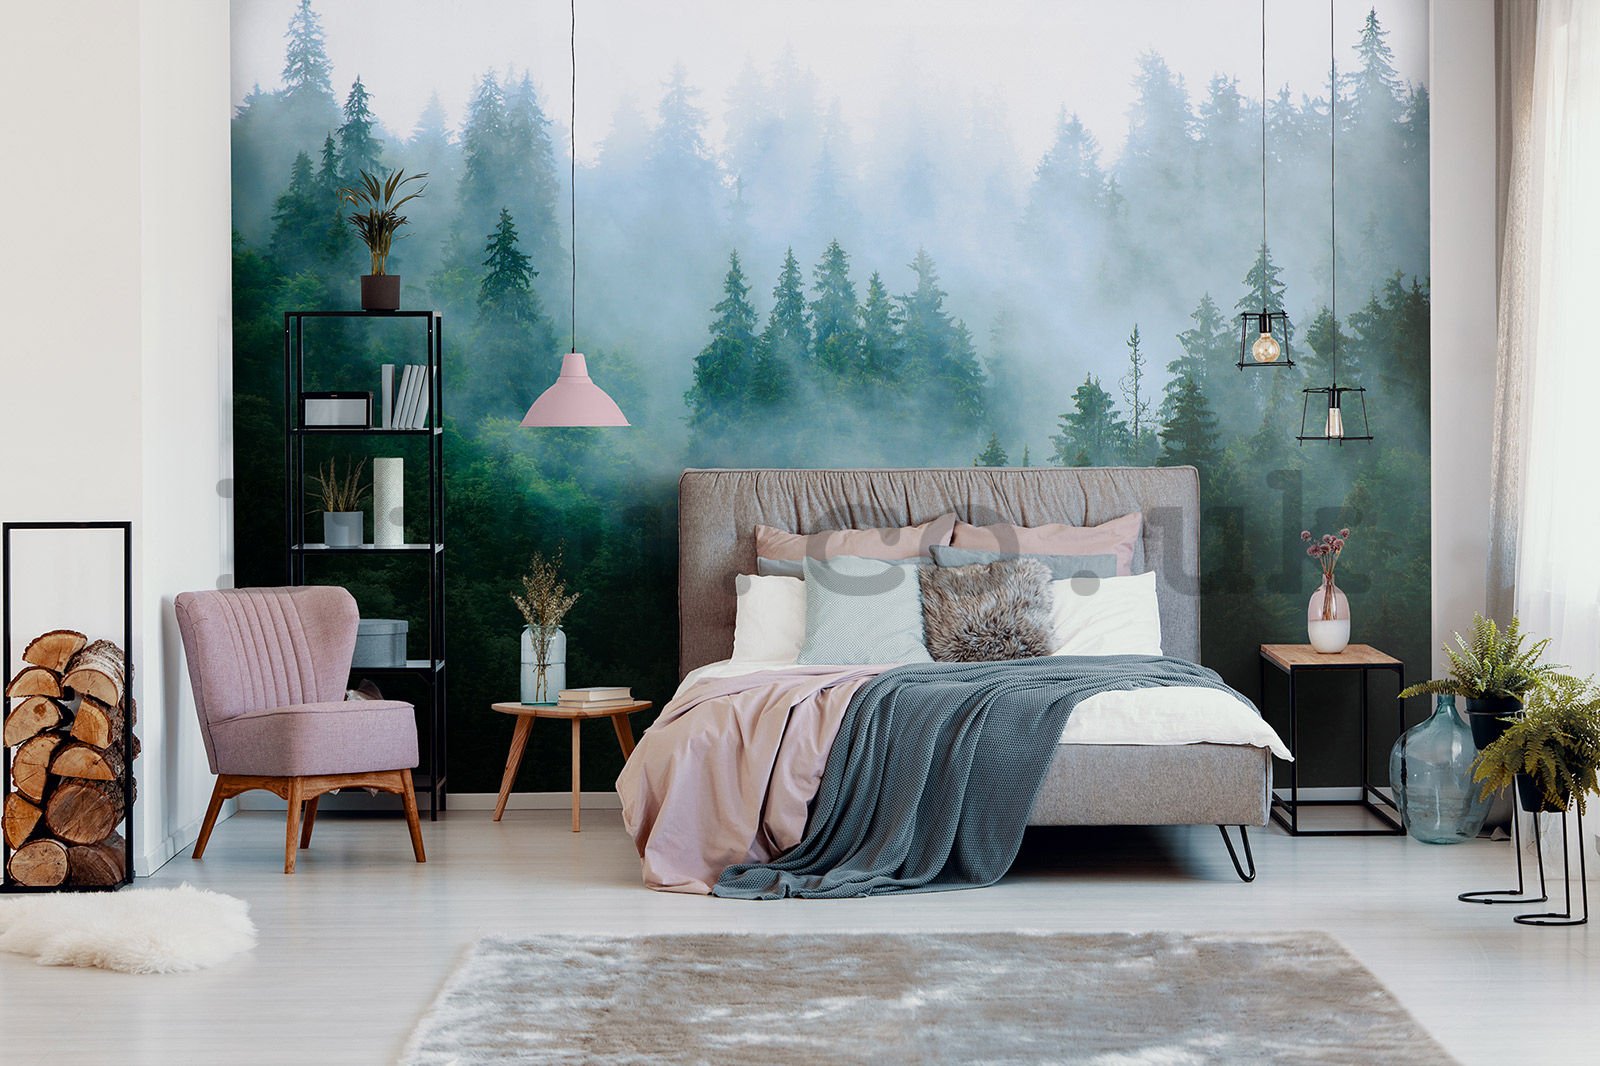 Wall mural vlies: Fog over the forest (3) - 152,5x104 cm